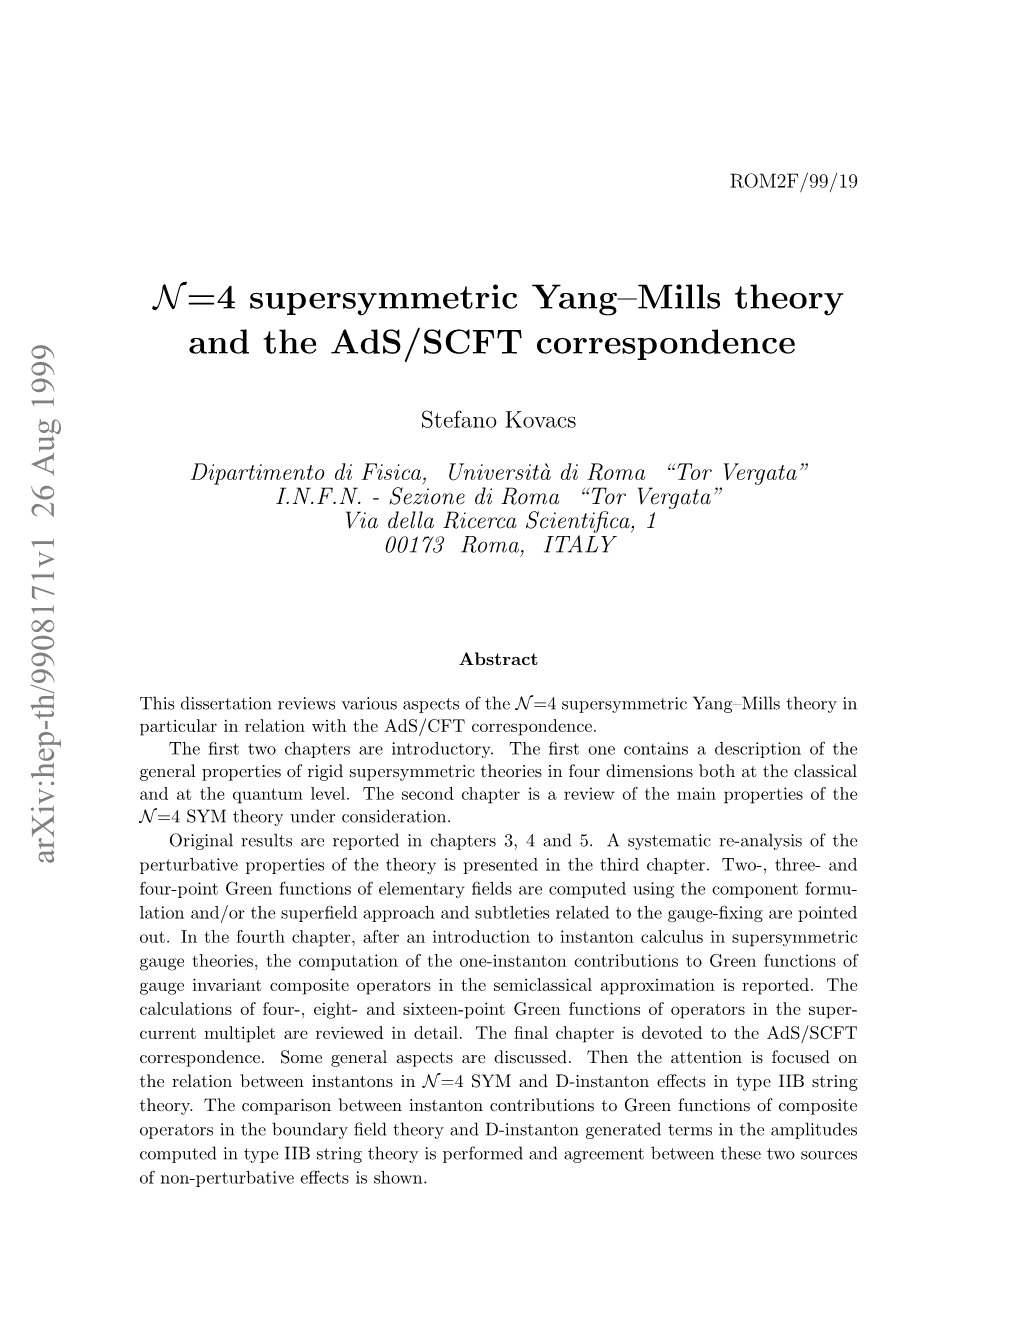 N=4 Supersymmetric Yang–Mills Theory and the Ads/SCFT